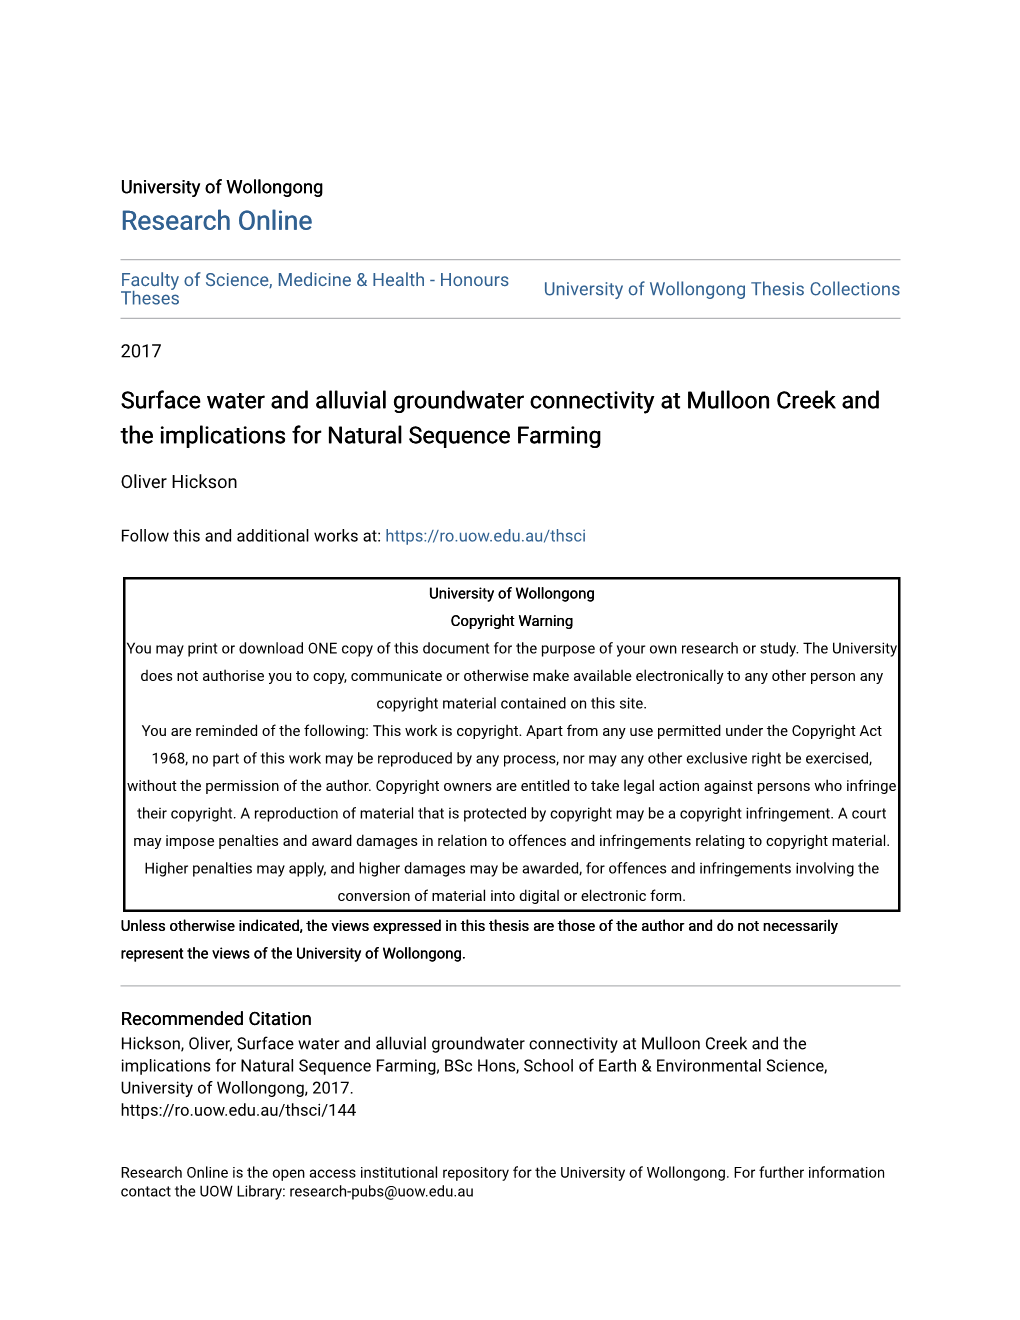 Surface Water and Alluvial Groundwater Connectivity at Mulloon Creek and the Implications for Natural Sequence Farming